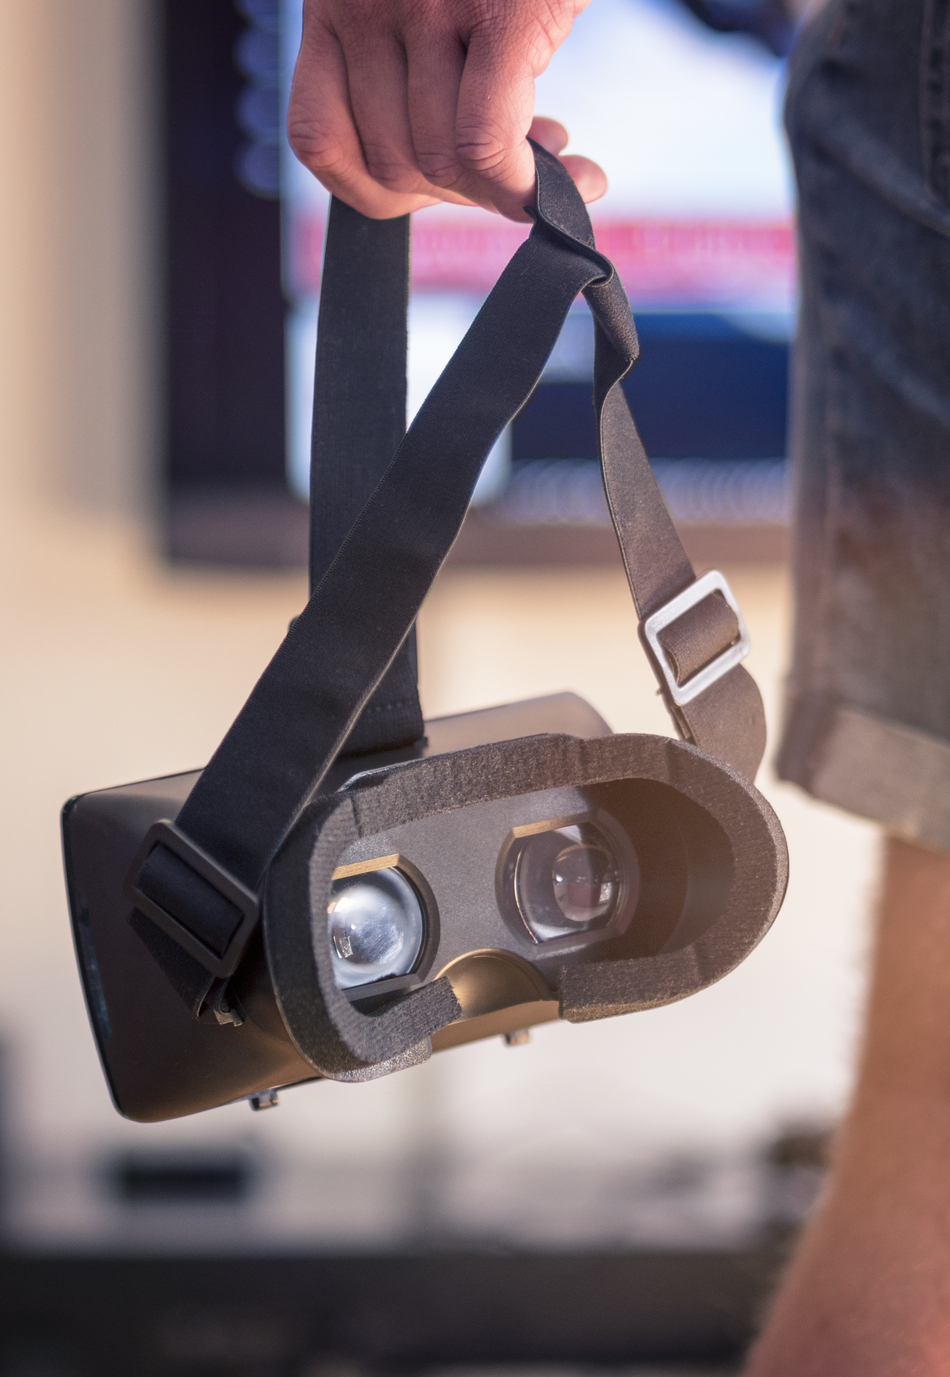 Virtual Reality Could Rehabilitate Offenders of Domestic Violence